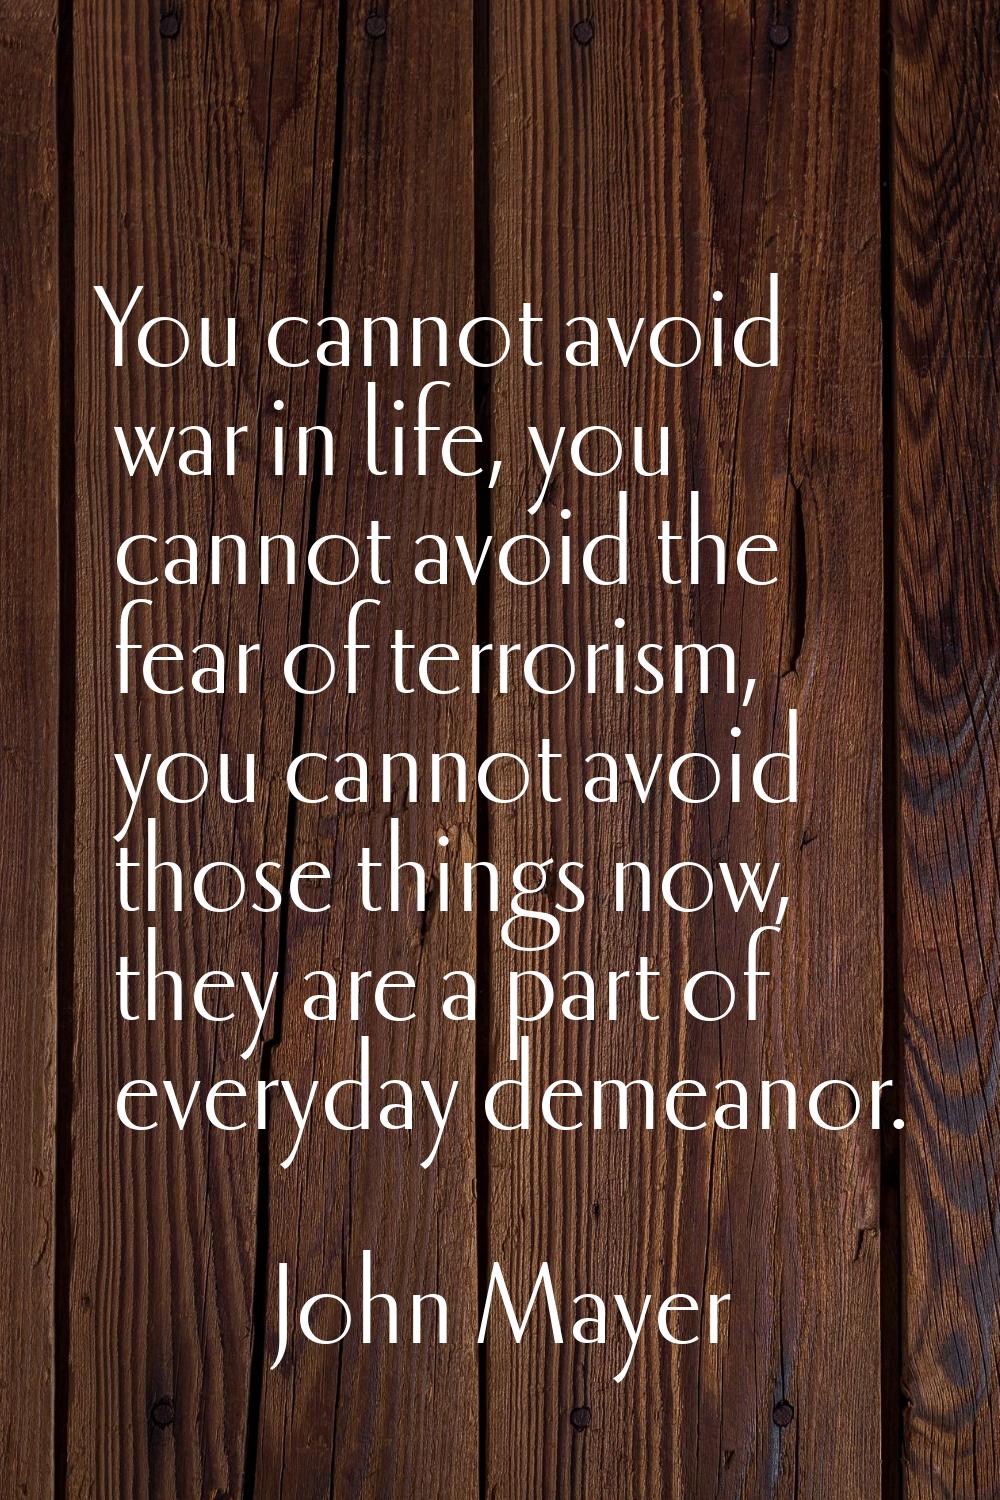 You cannot avoid war in life, you cannot avoid the fear of terrorism, you cannot avoid those things